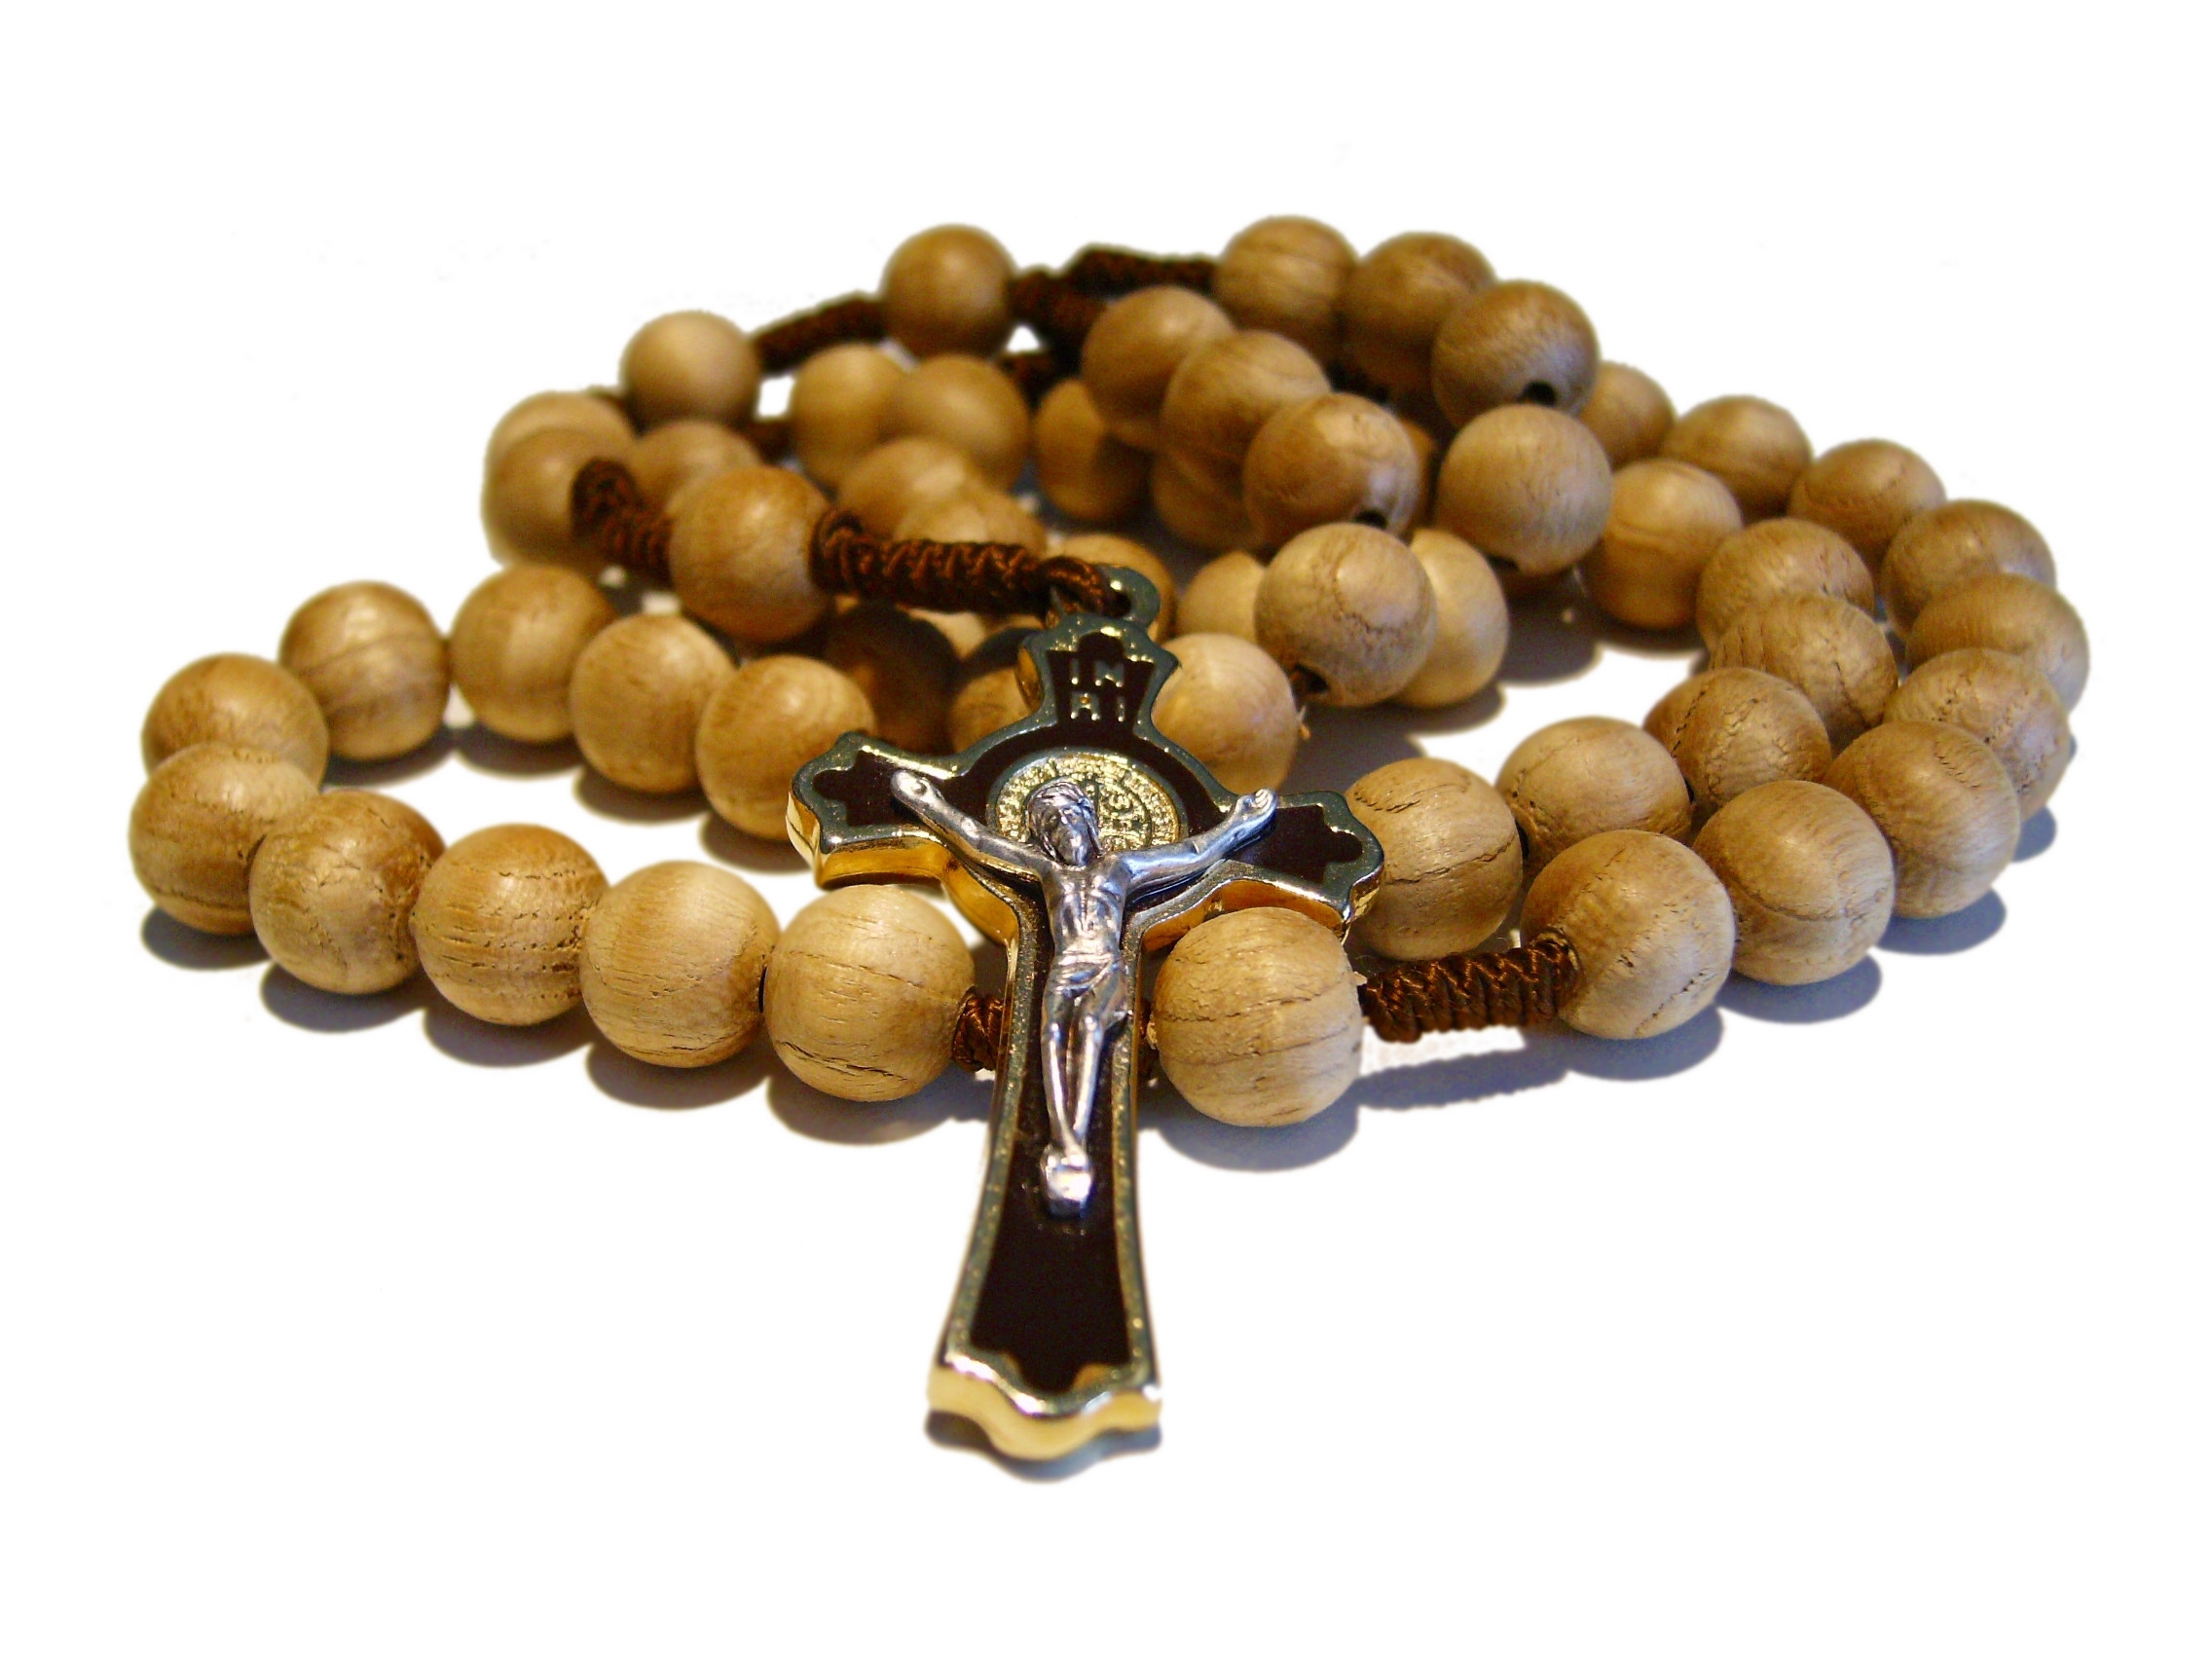 Catholic Q&A #9: What is the history of the rosary?